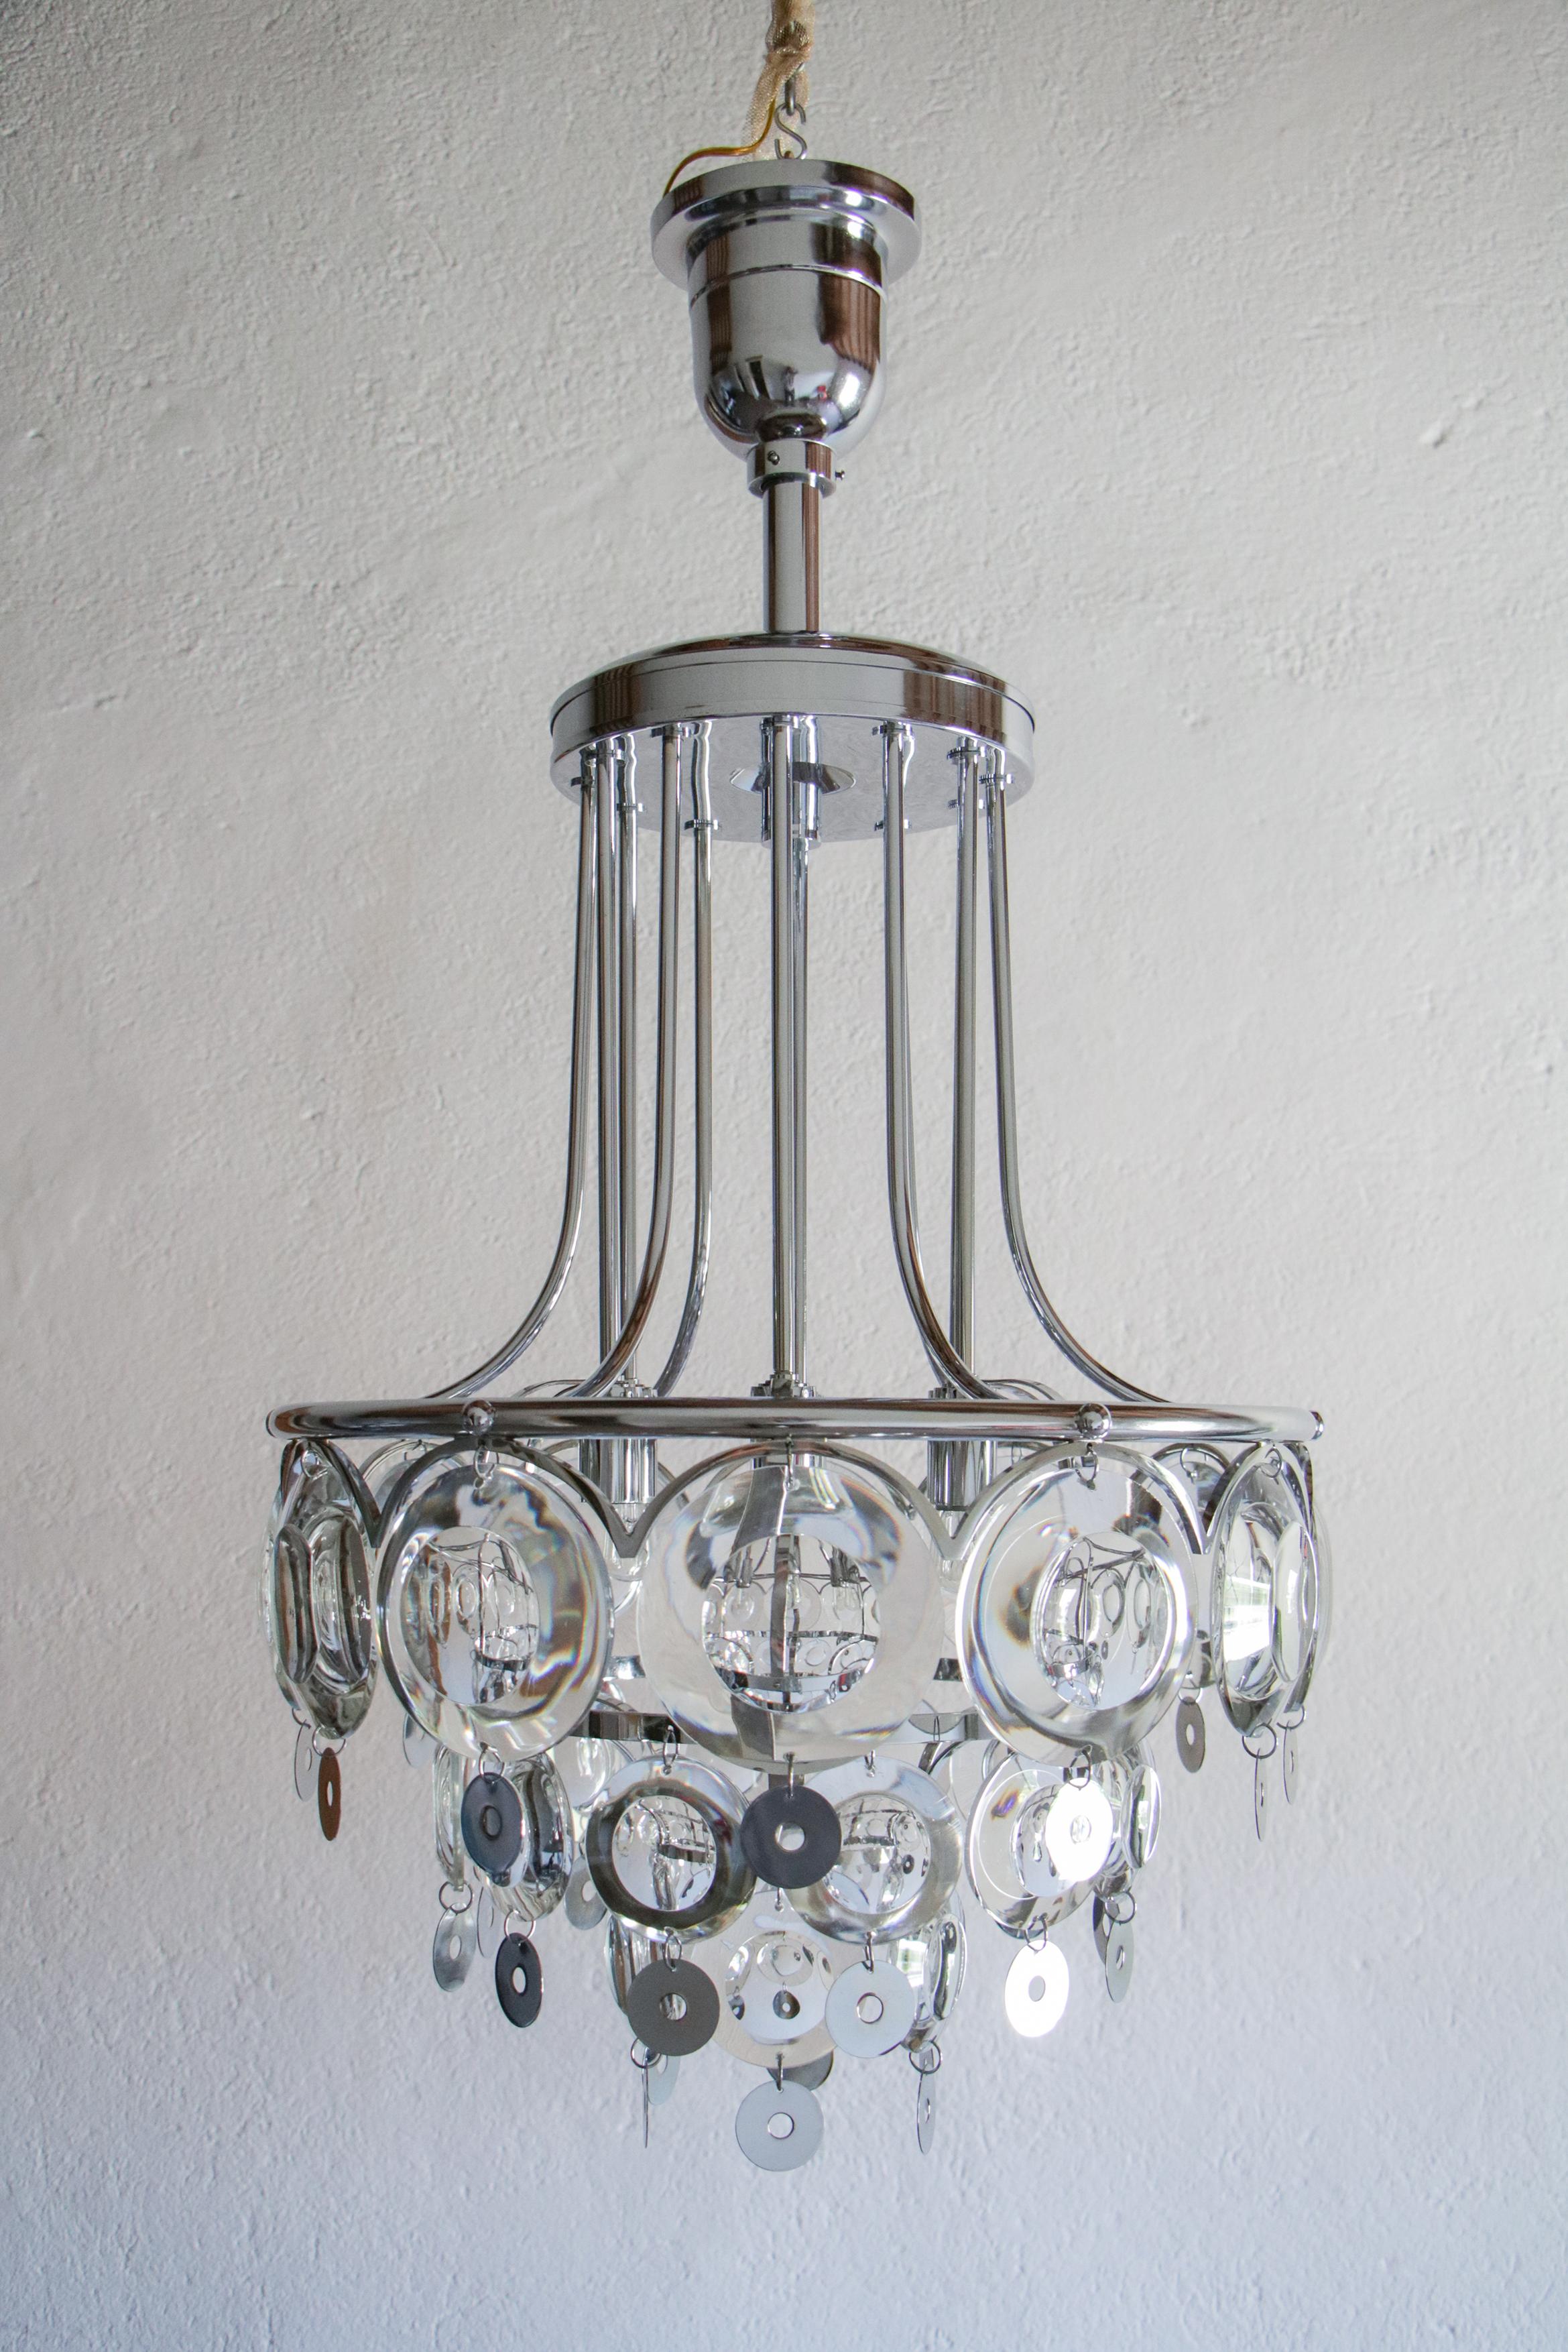 Space Age Italian Chromed Chandelier Attributed to Oscar Torlasco, 1970s For Sale